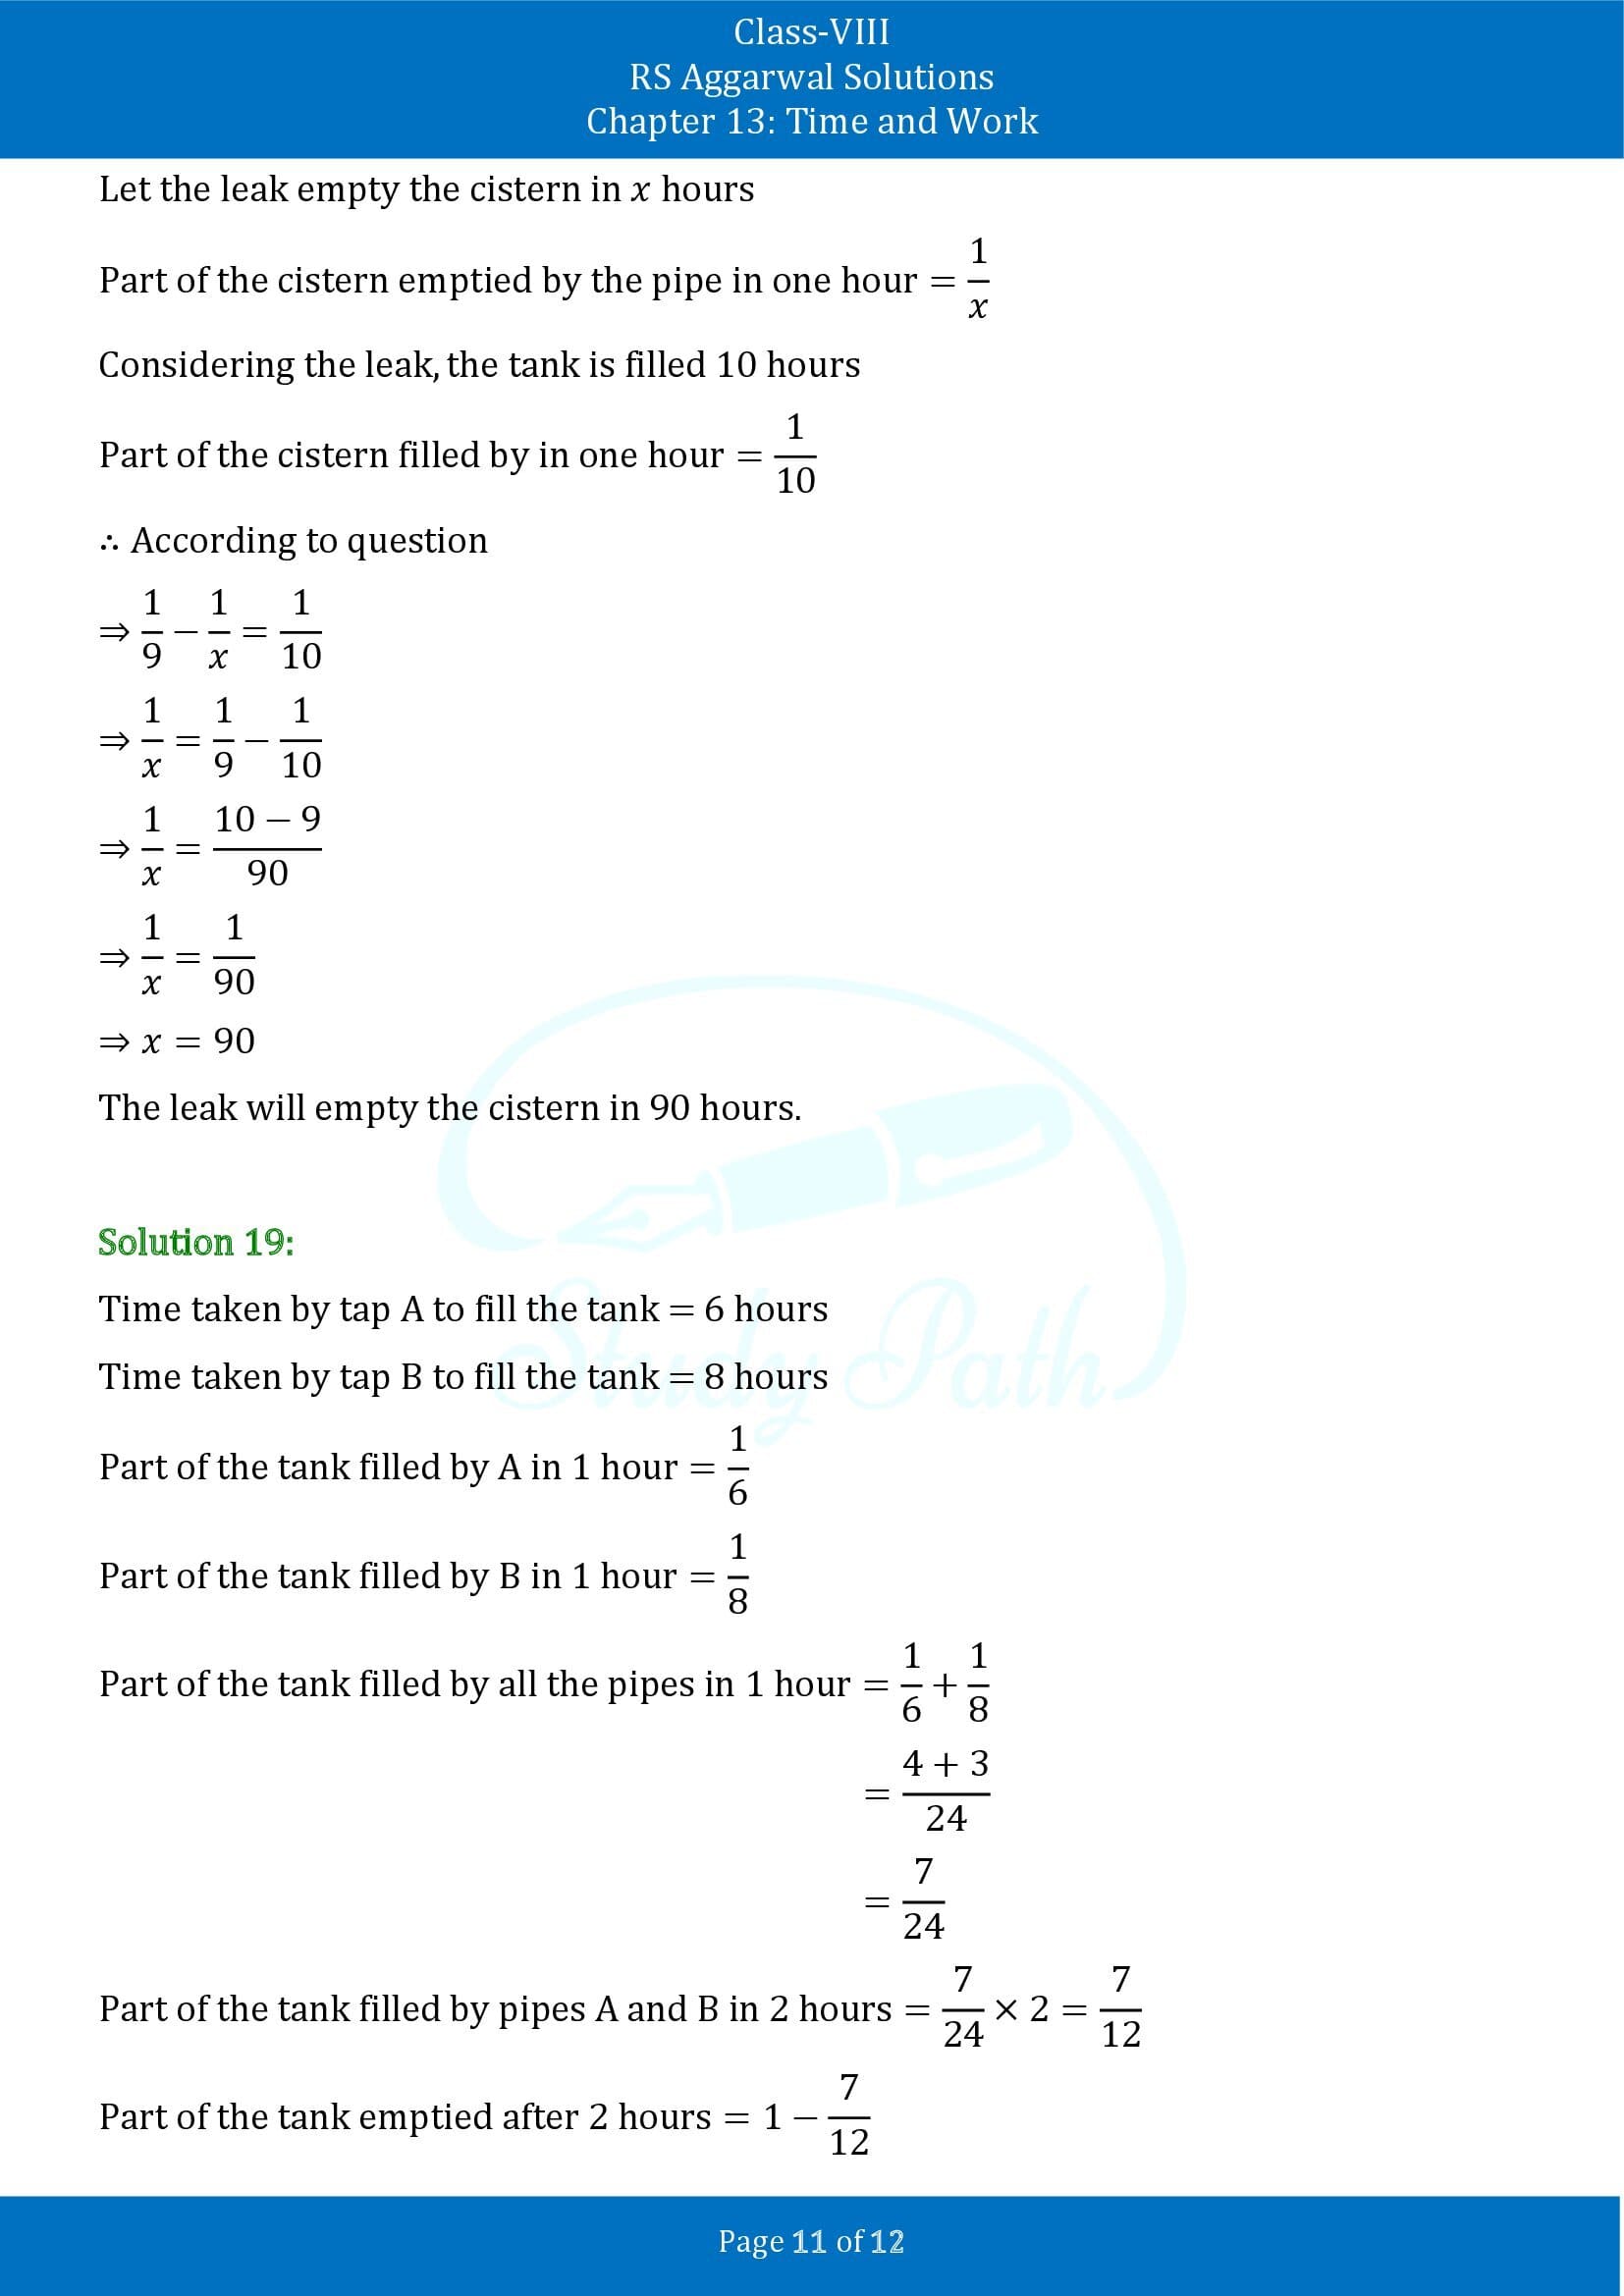 RS Aggarwal Solutions Class 8 Chapter 13 Time and Work Exercise 13A 00011